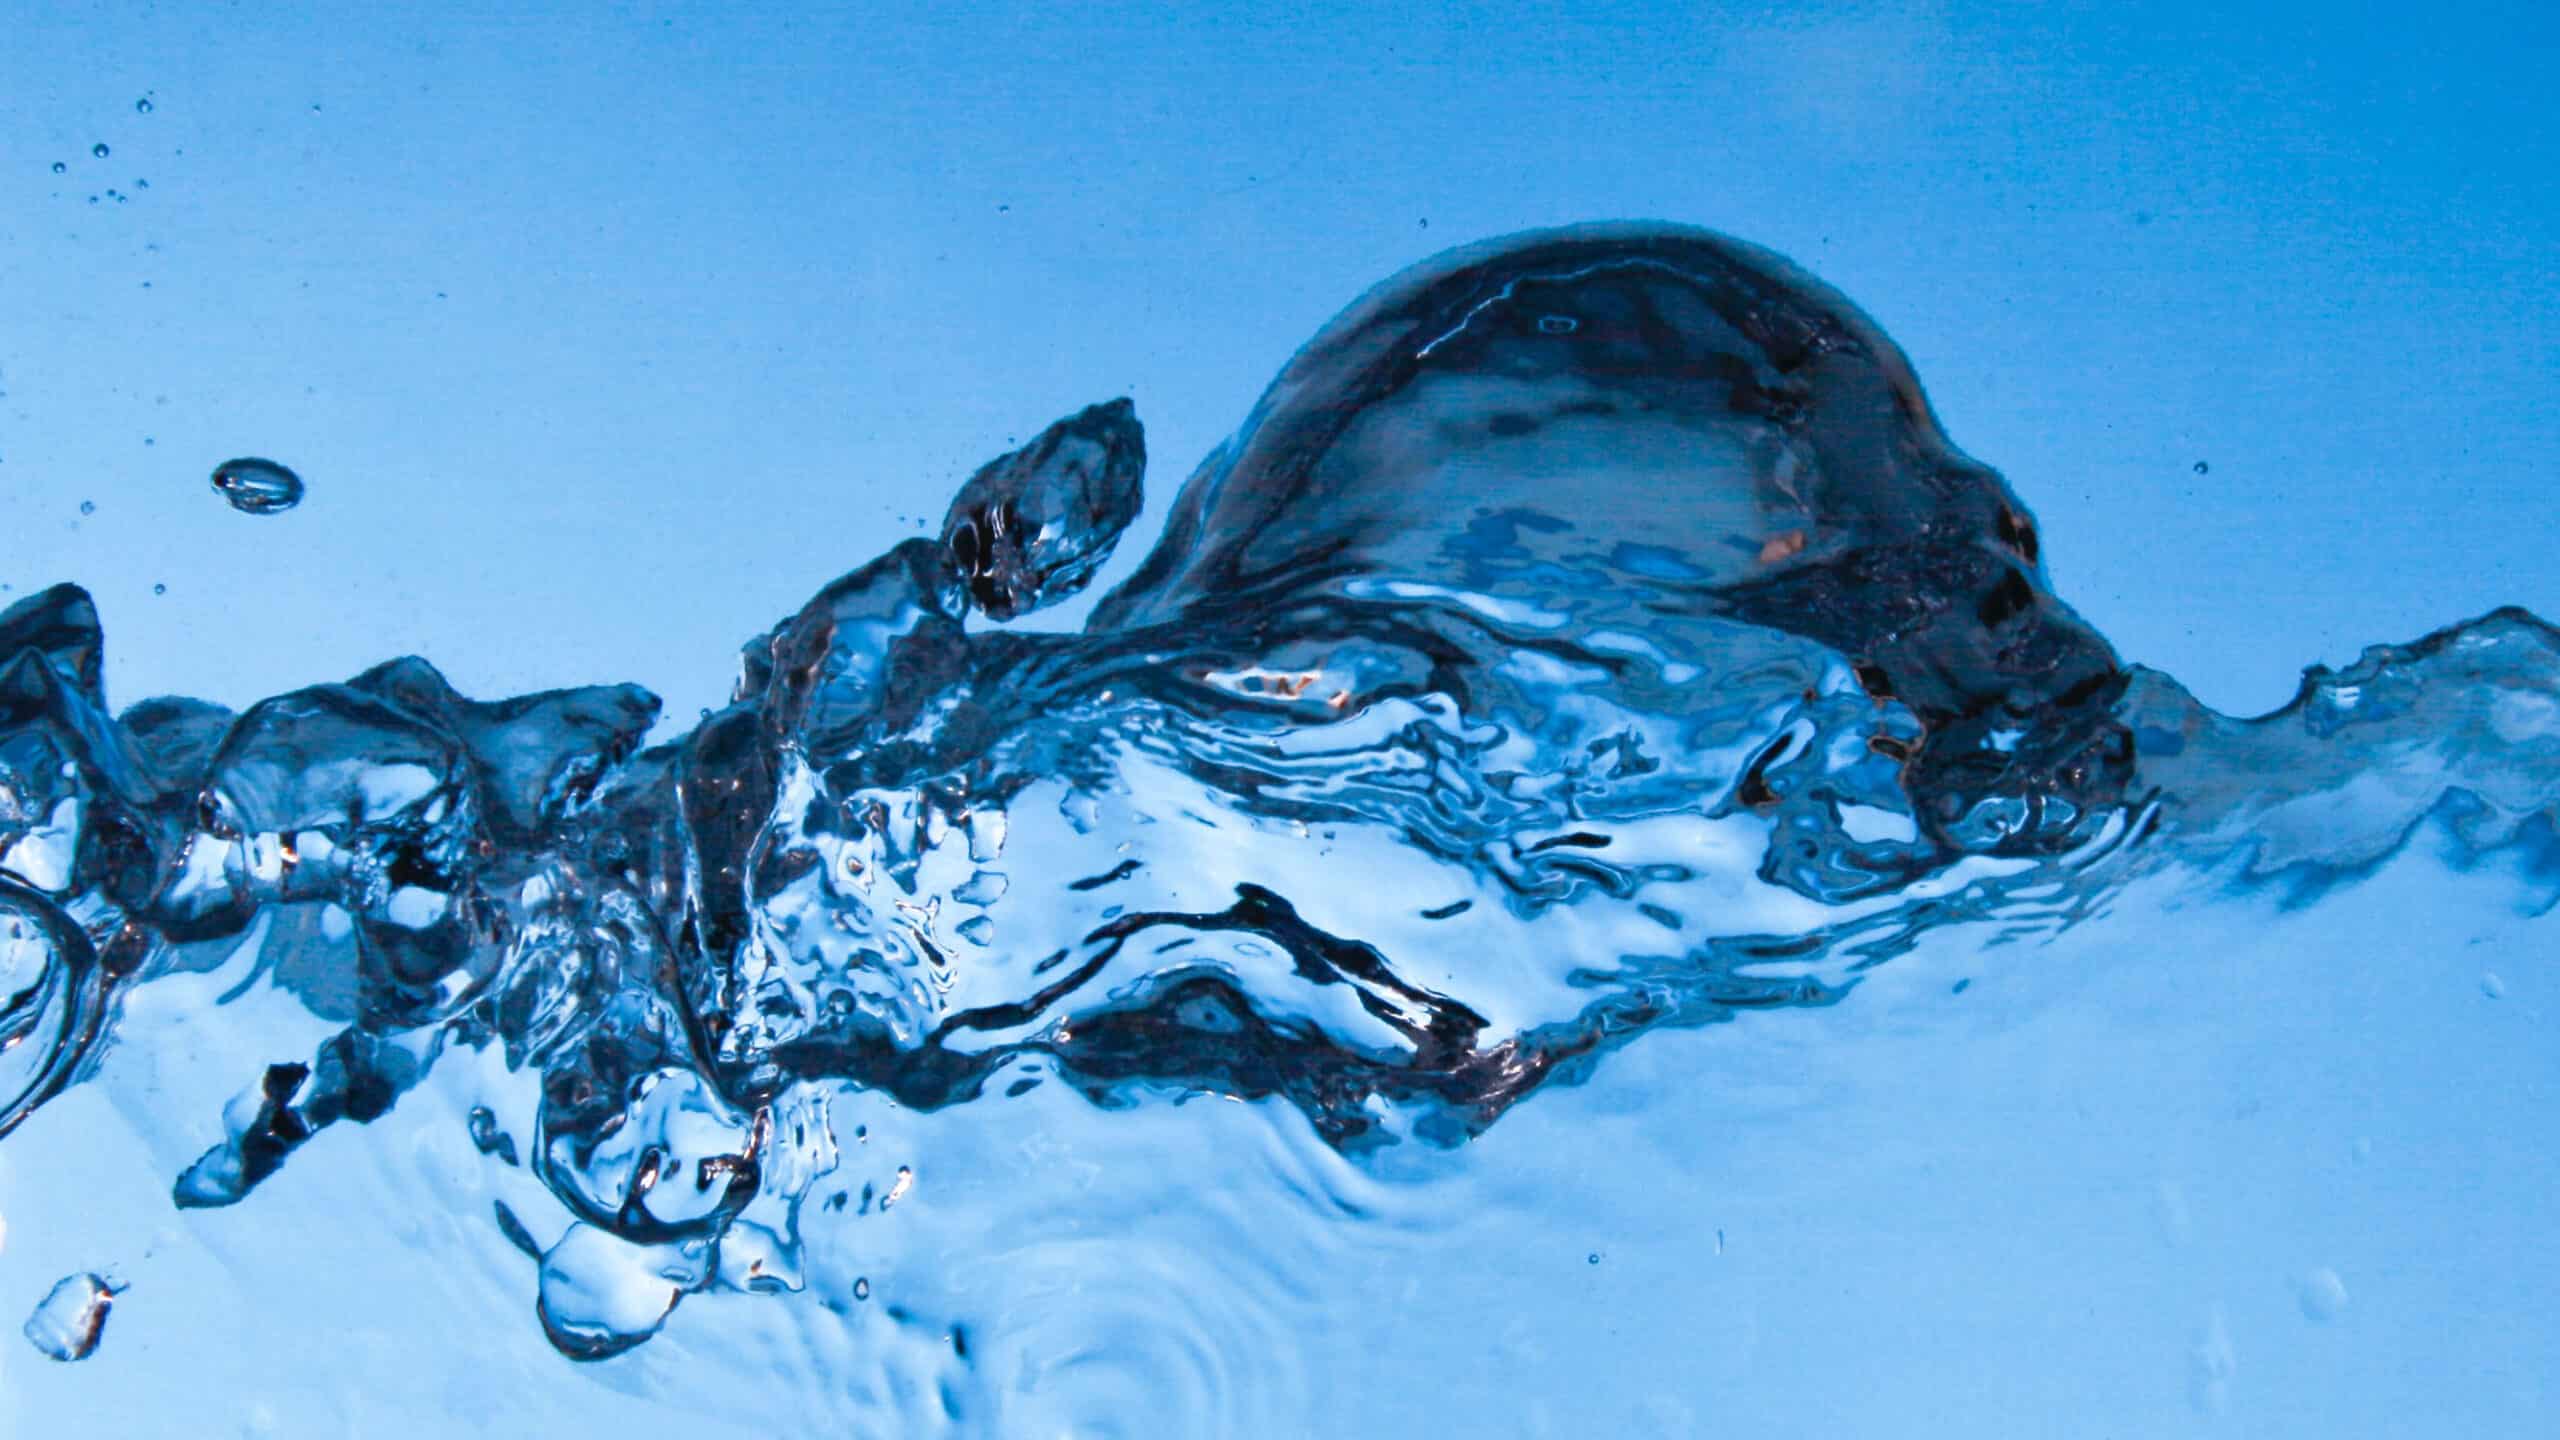 Blue water ripple - Studying Fundamentals of Water as Solvent Could Lead to Greener Cellulose-Based Products - Forest Biomaterials NC State University